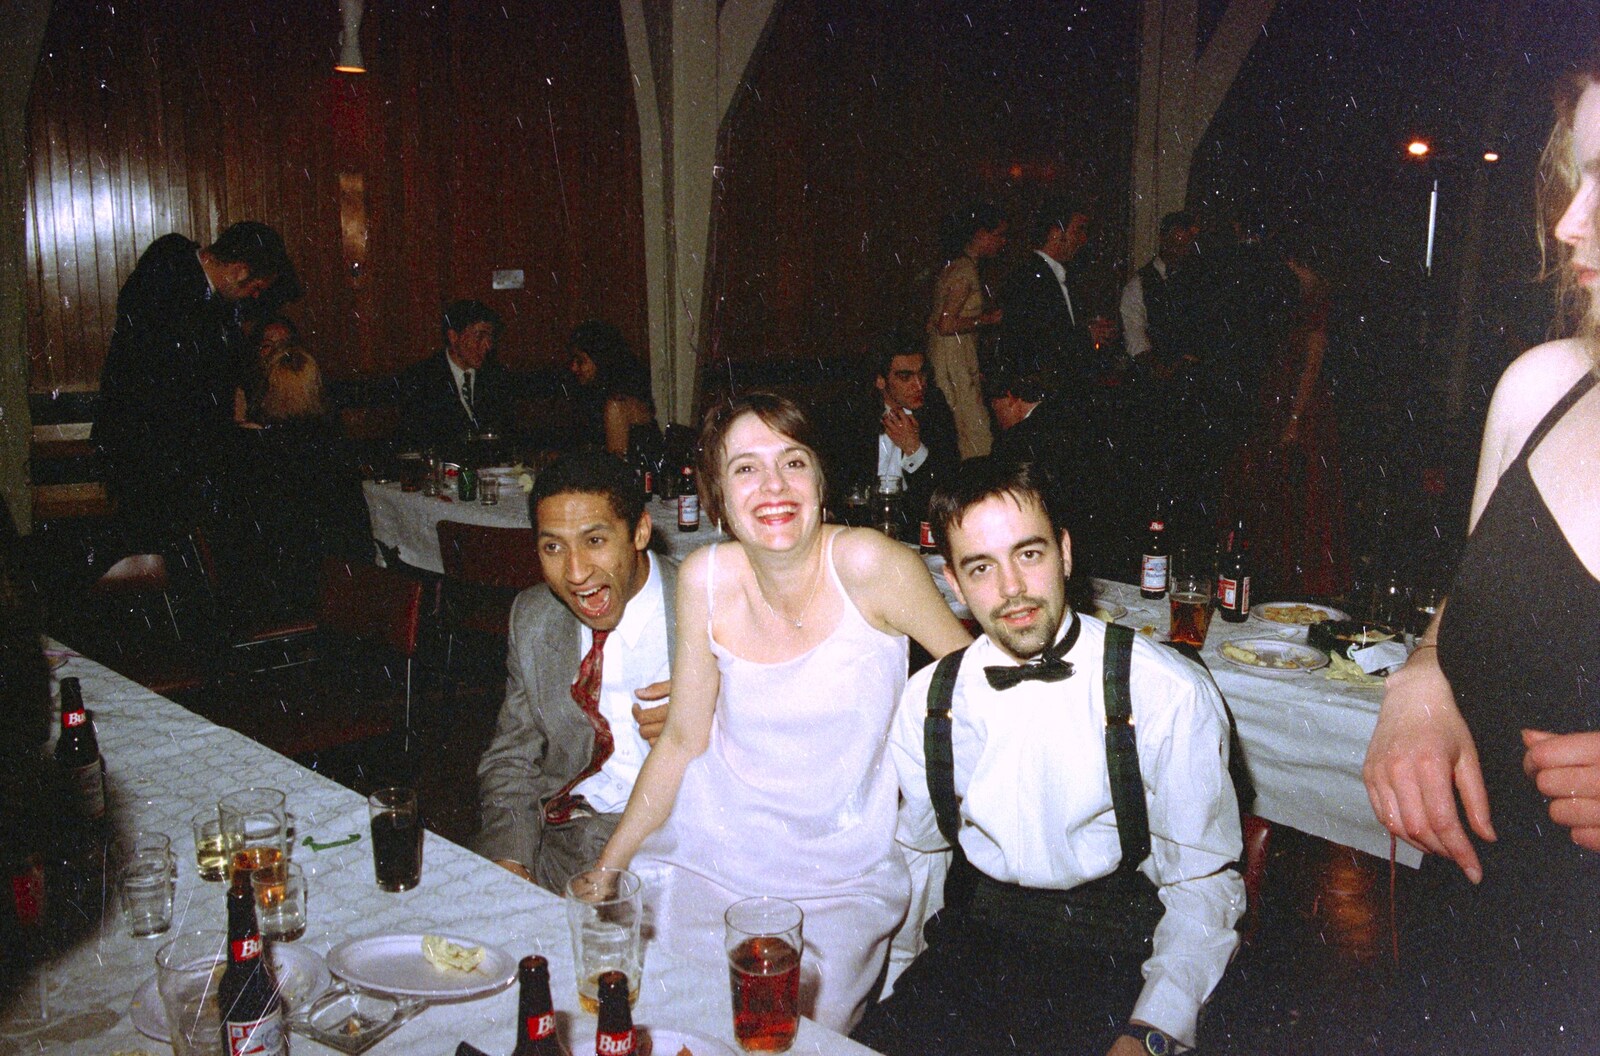 Rob and Trevor from CISU at the Suffolk College May Ball, Ipswich, Suffolk - 11th May 1997